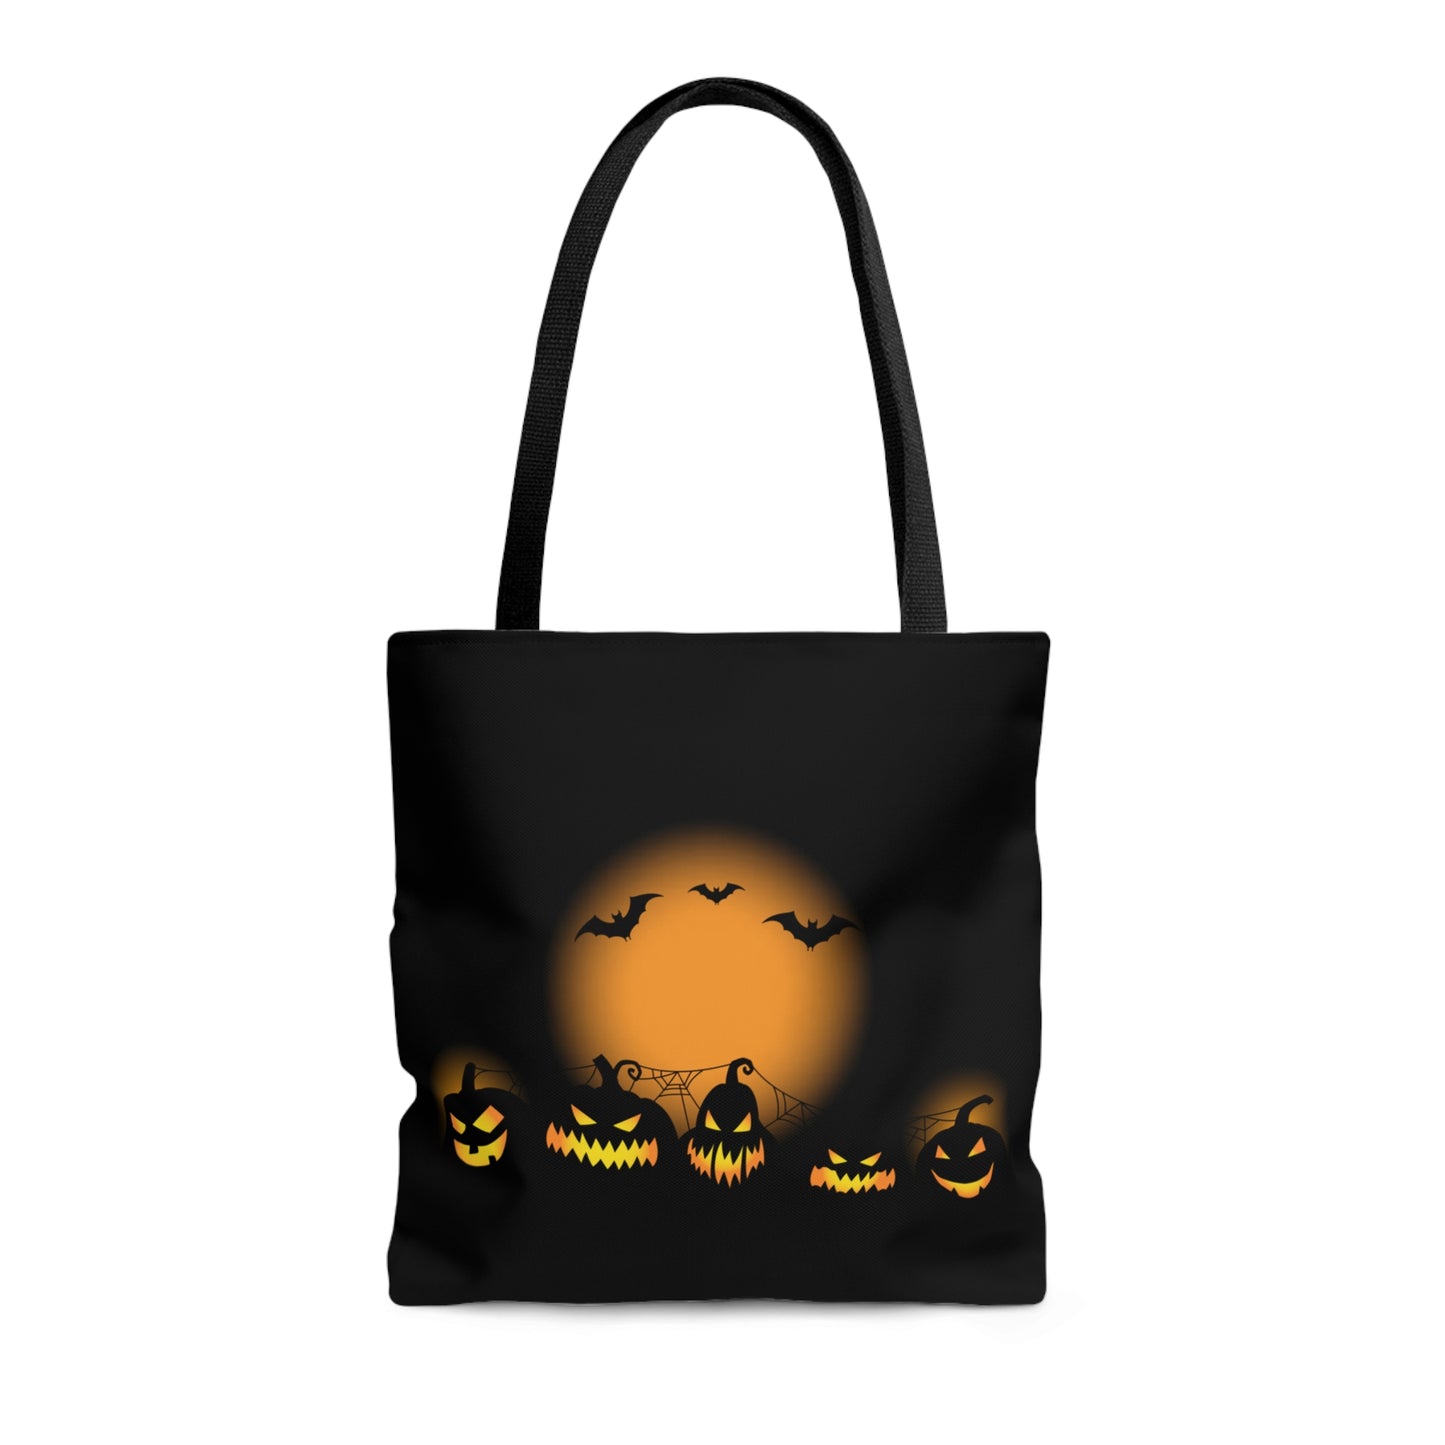 Spooky Jack O'Lanters Halloween Tote Bag | Kids Trick or Treat Candy Tote